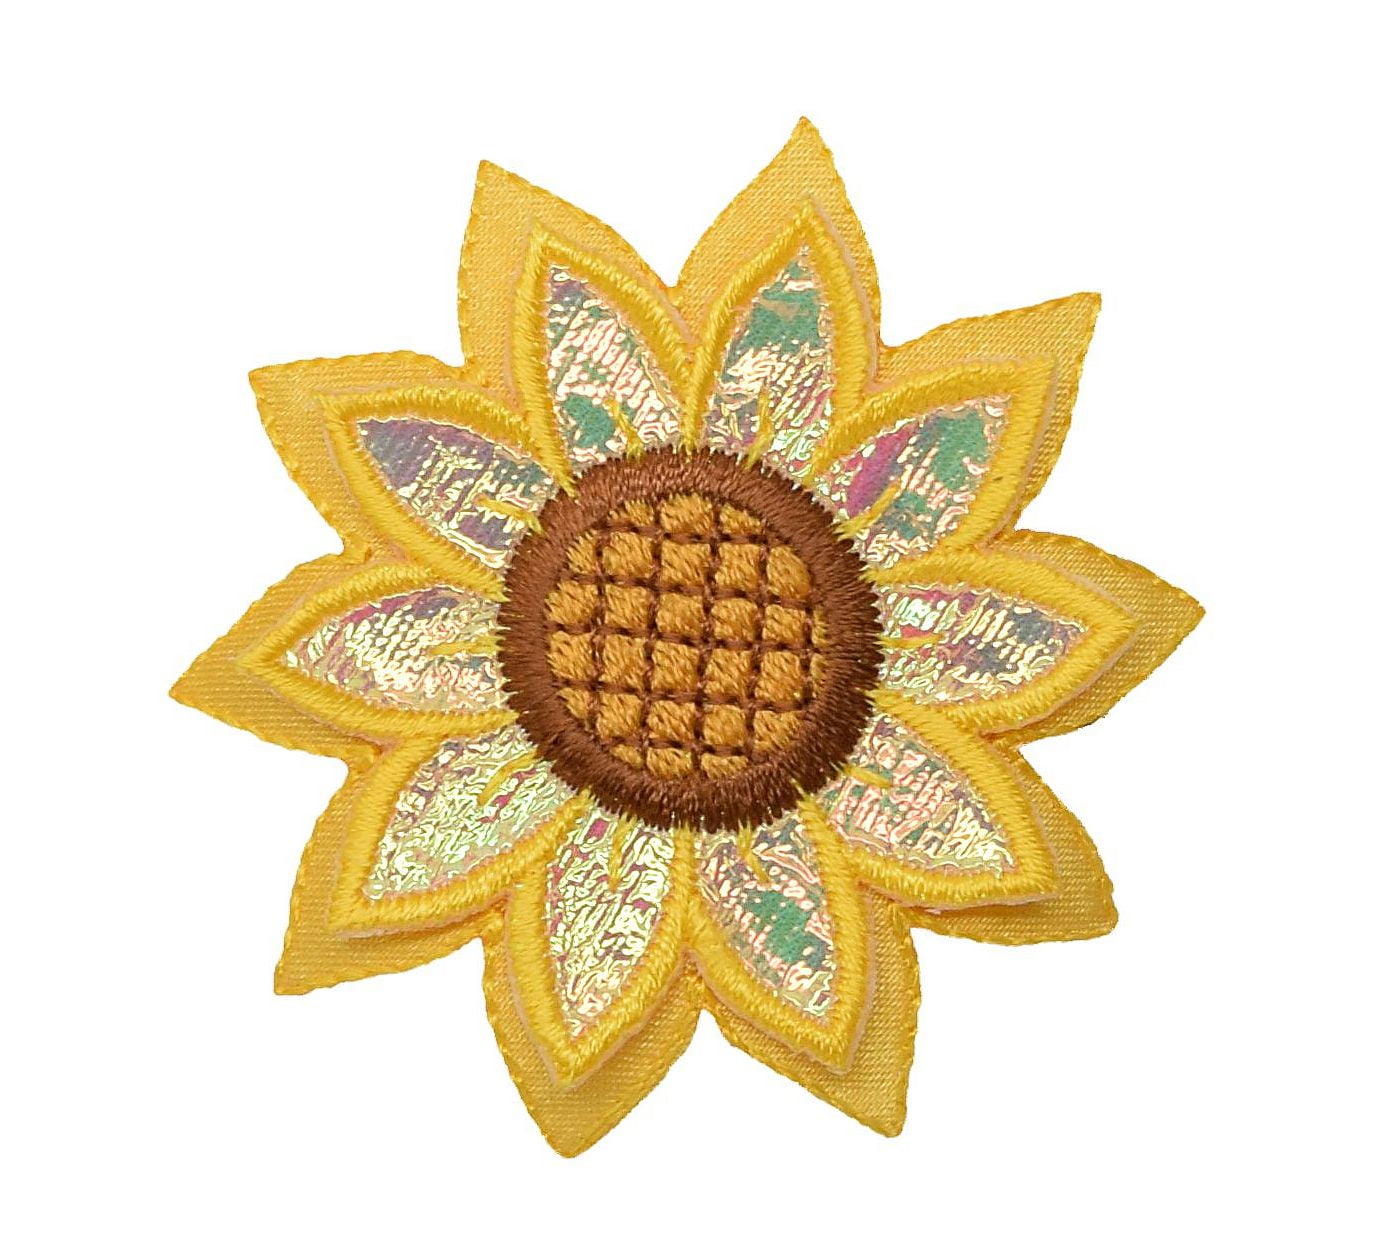 10Pcs Yellow Sunflower Patches Iron on Patch Embroidered Applique Sewing CraUTxb 